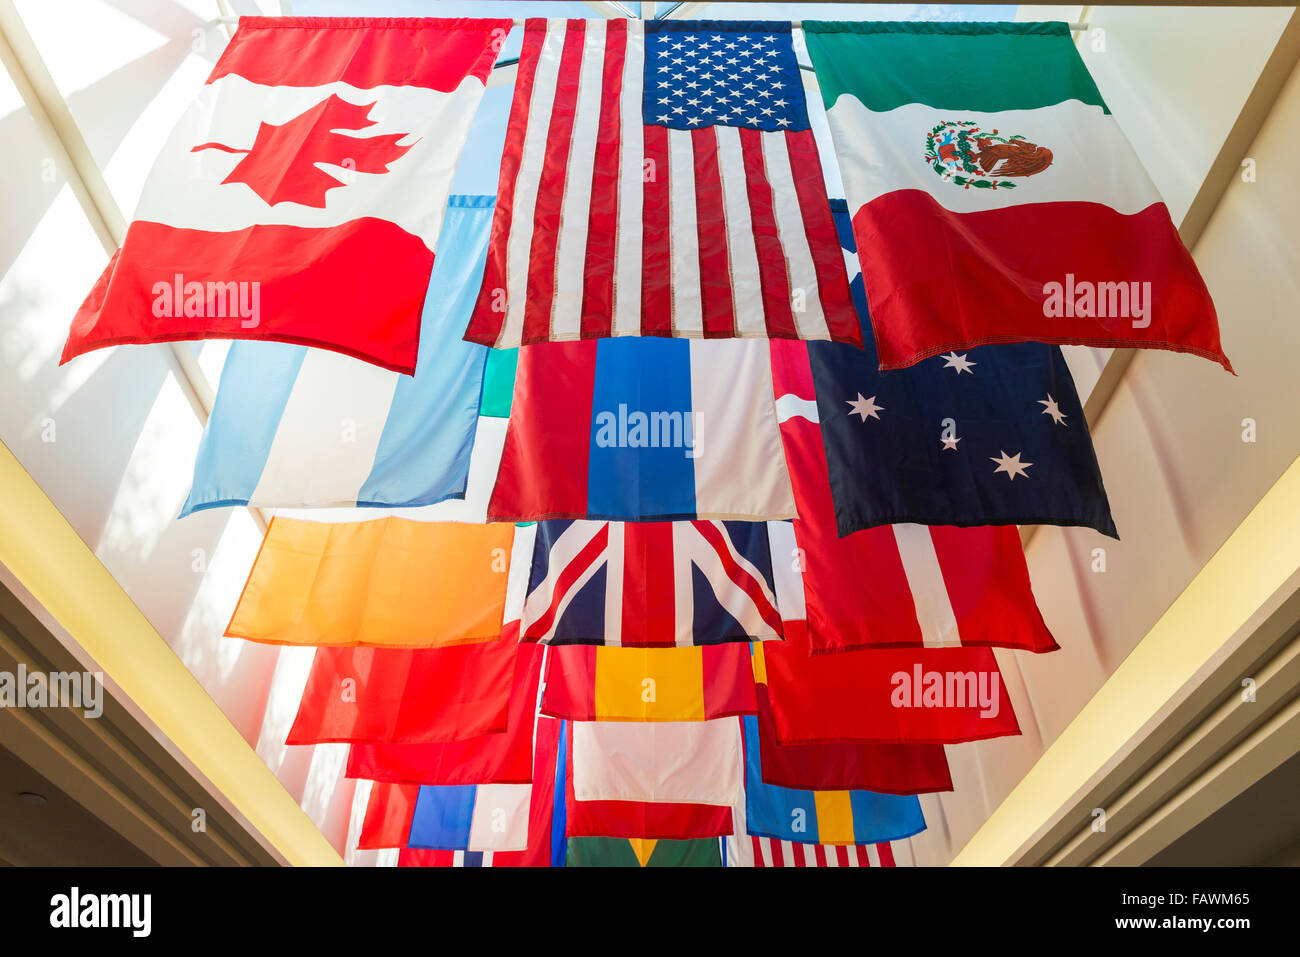 Flags from various countries hanging, Southern Methodist University; Dallas, Texas, United States of America Stock Photo